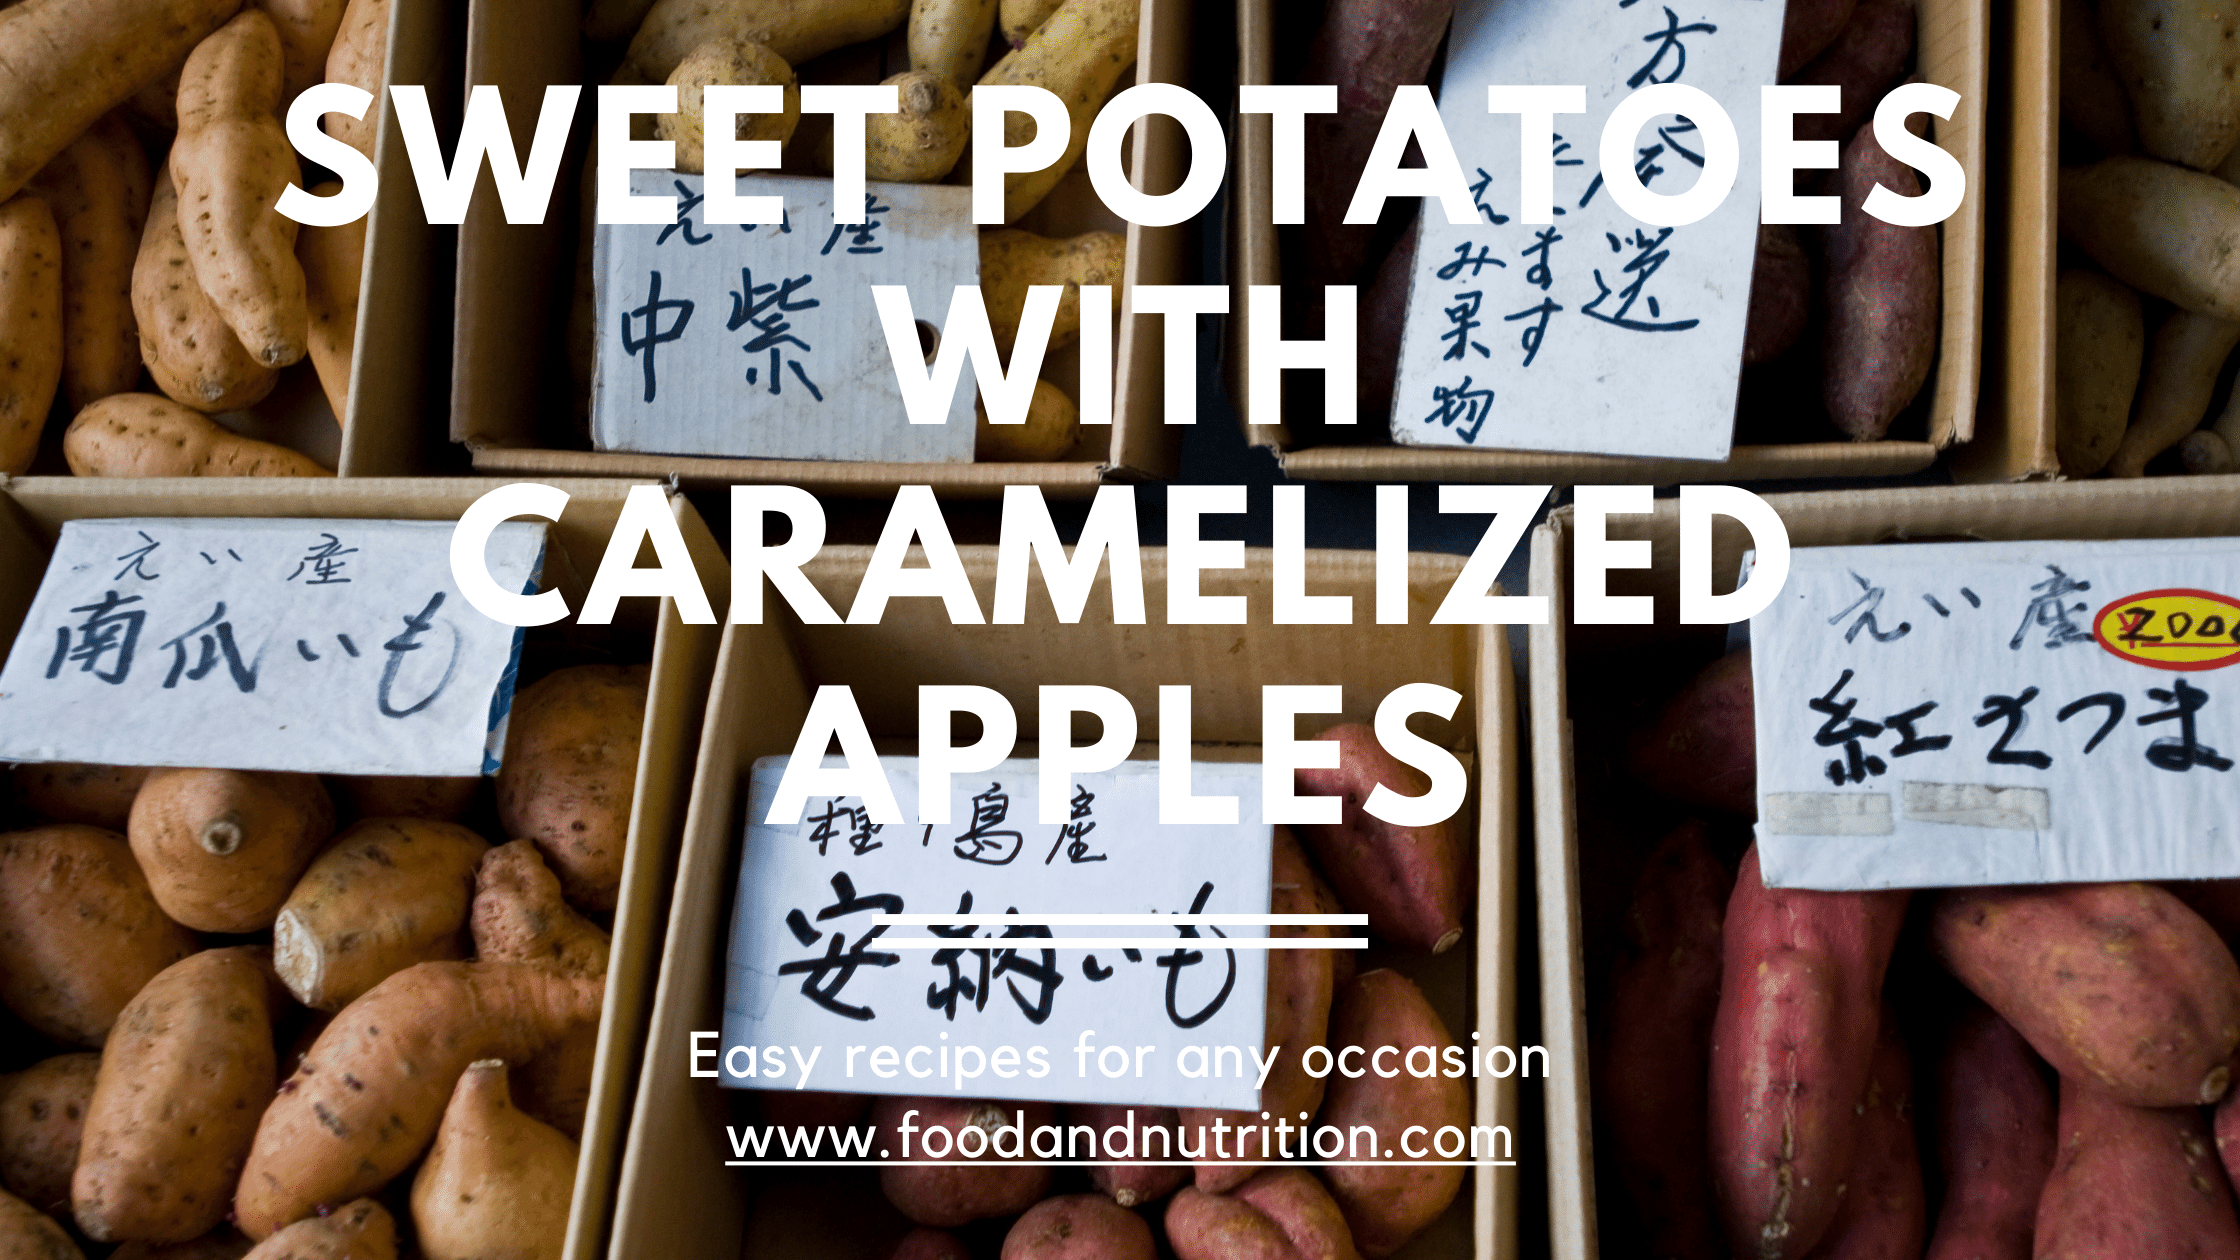 The Irresistible Delight: Sweet Potatoes with Caramelized Apples